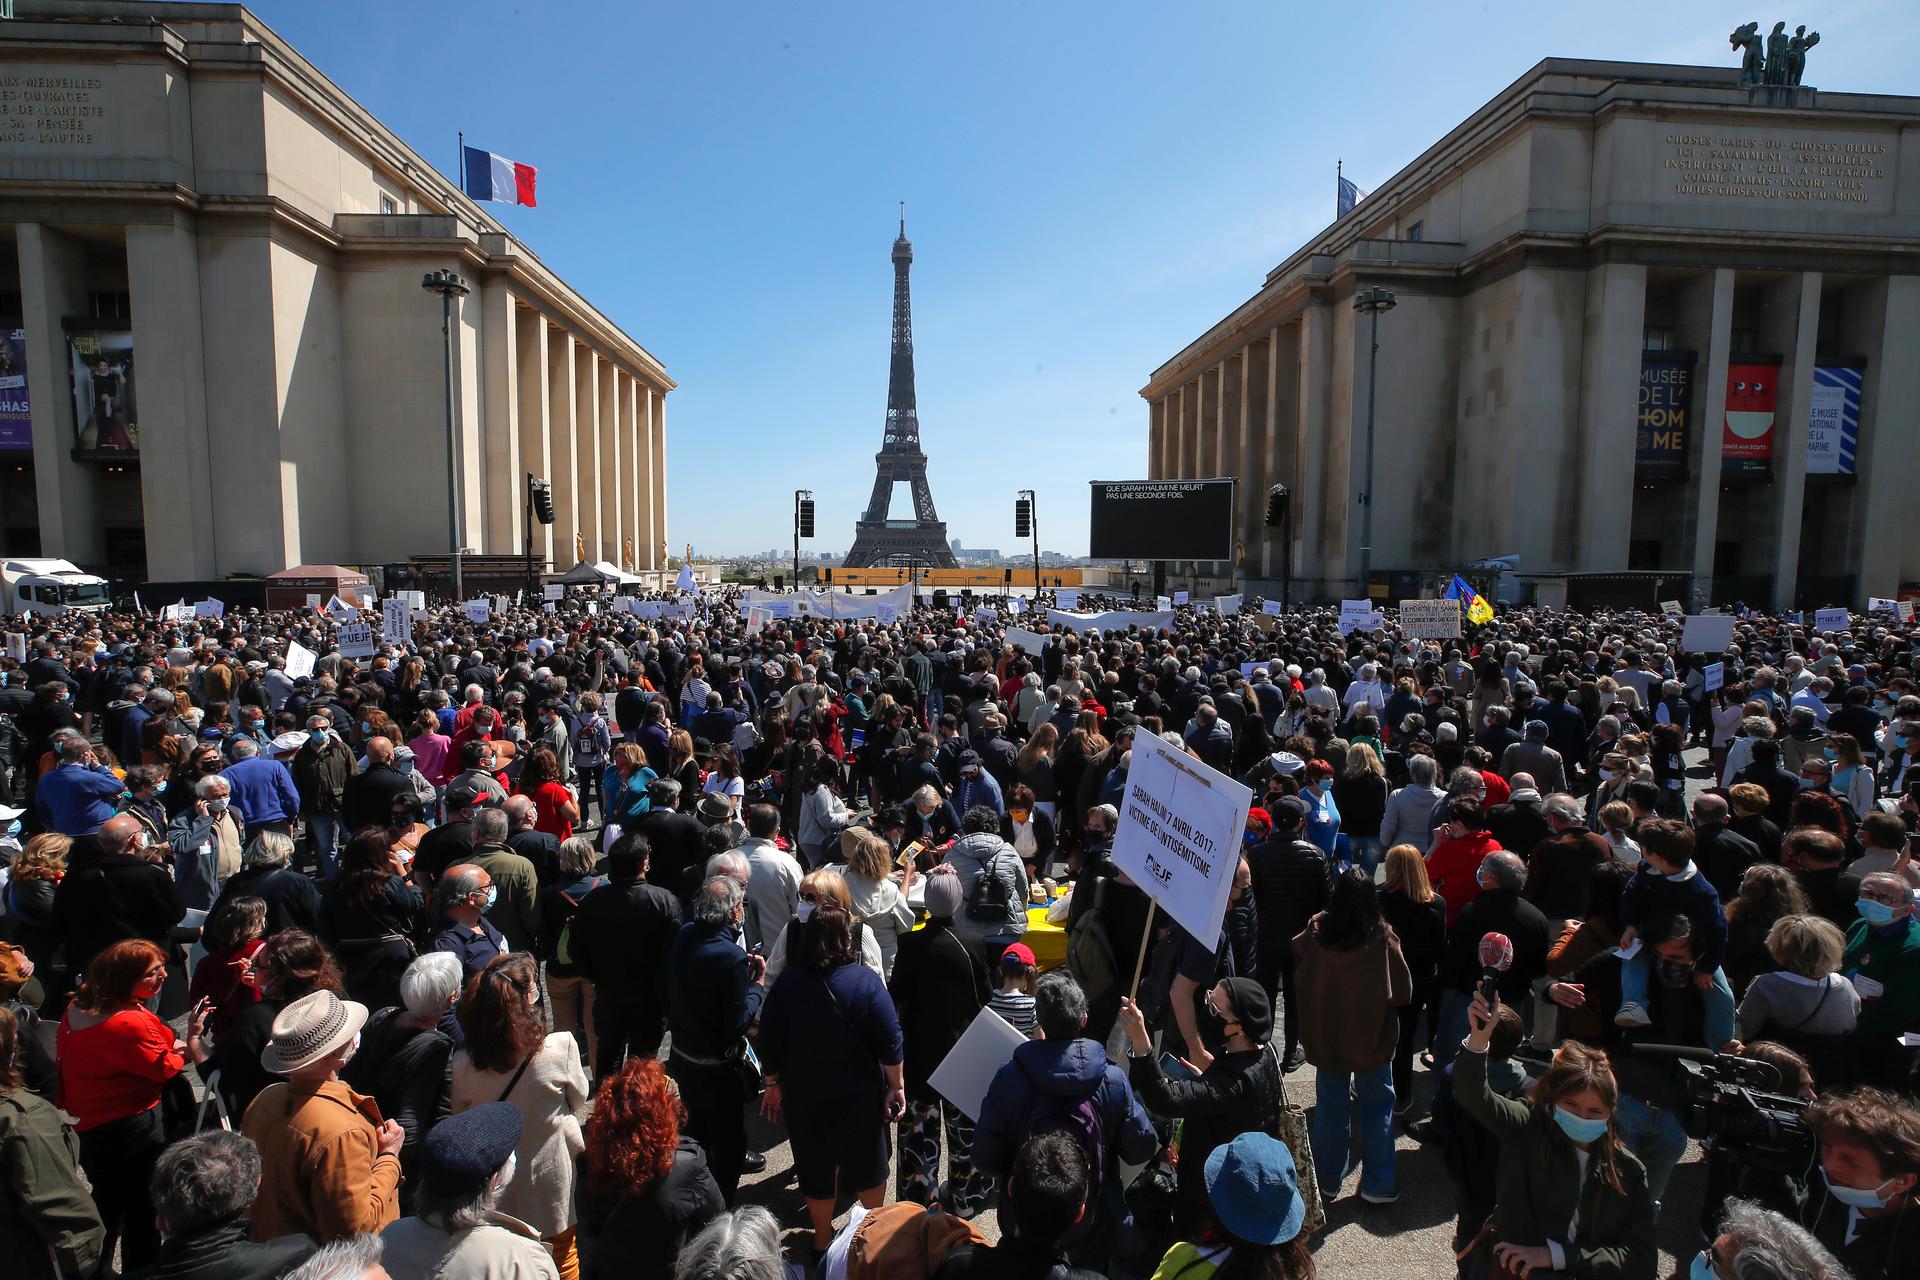 People stage a protest organized by Jewish associations, who say justice has not been done for the killing of French Jewish woman Sarah Halimi, at Trocadero Plaza near Eiffel Tower in Paris, Sunday, April 25, 2021. 